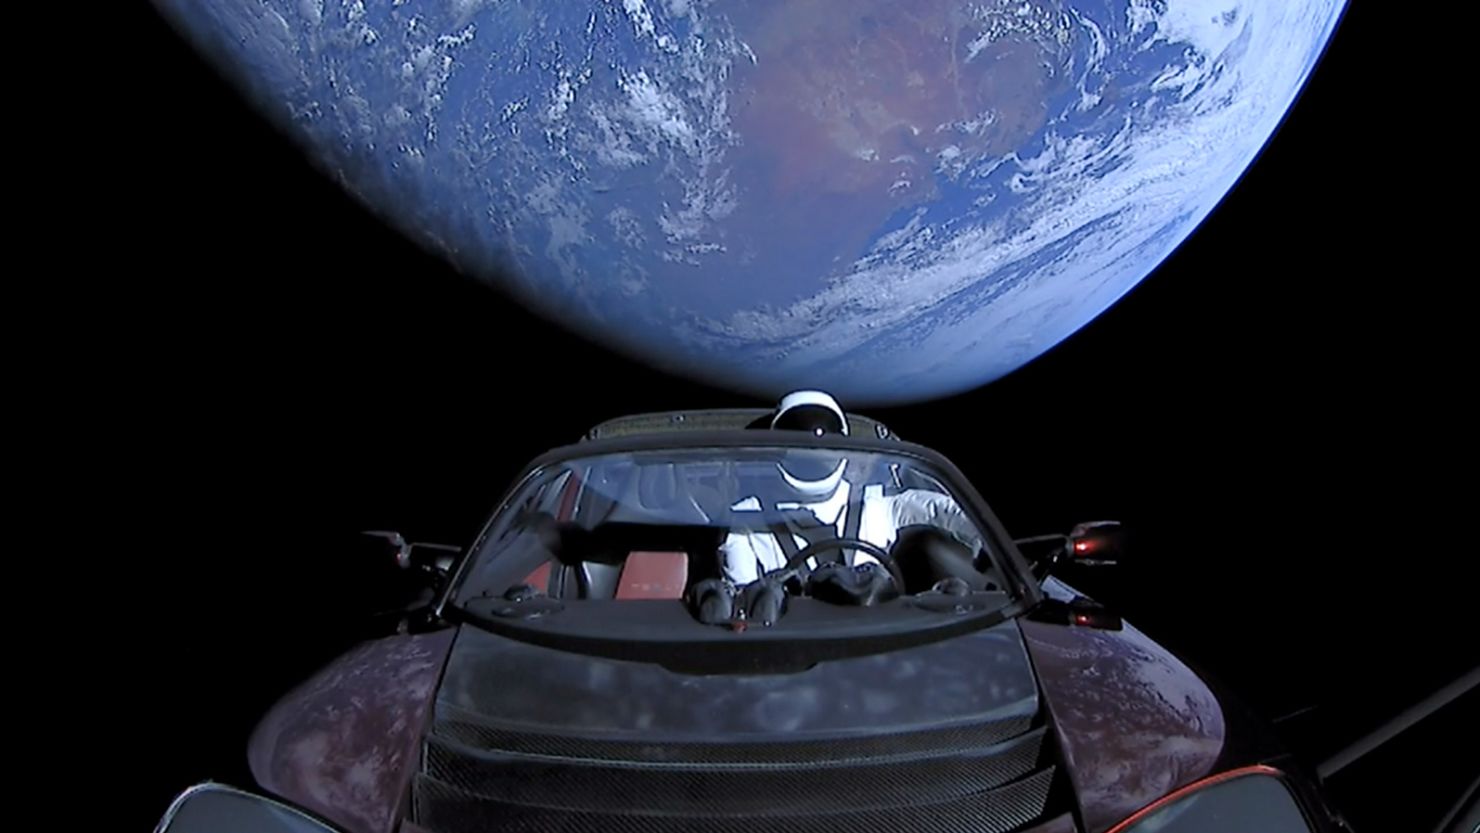 SpaceX put a Tesla sportscar into space five years ago. Where is